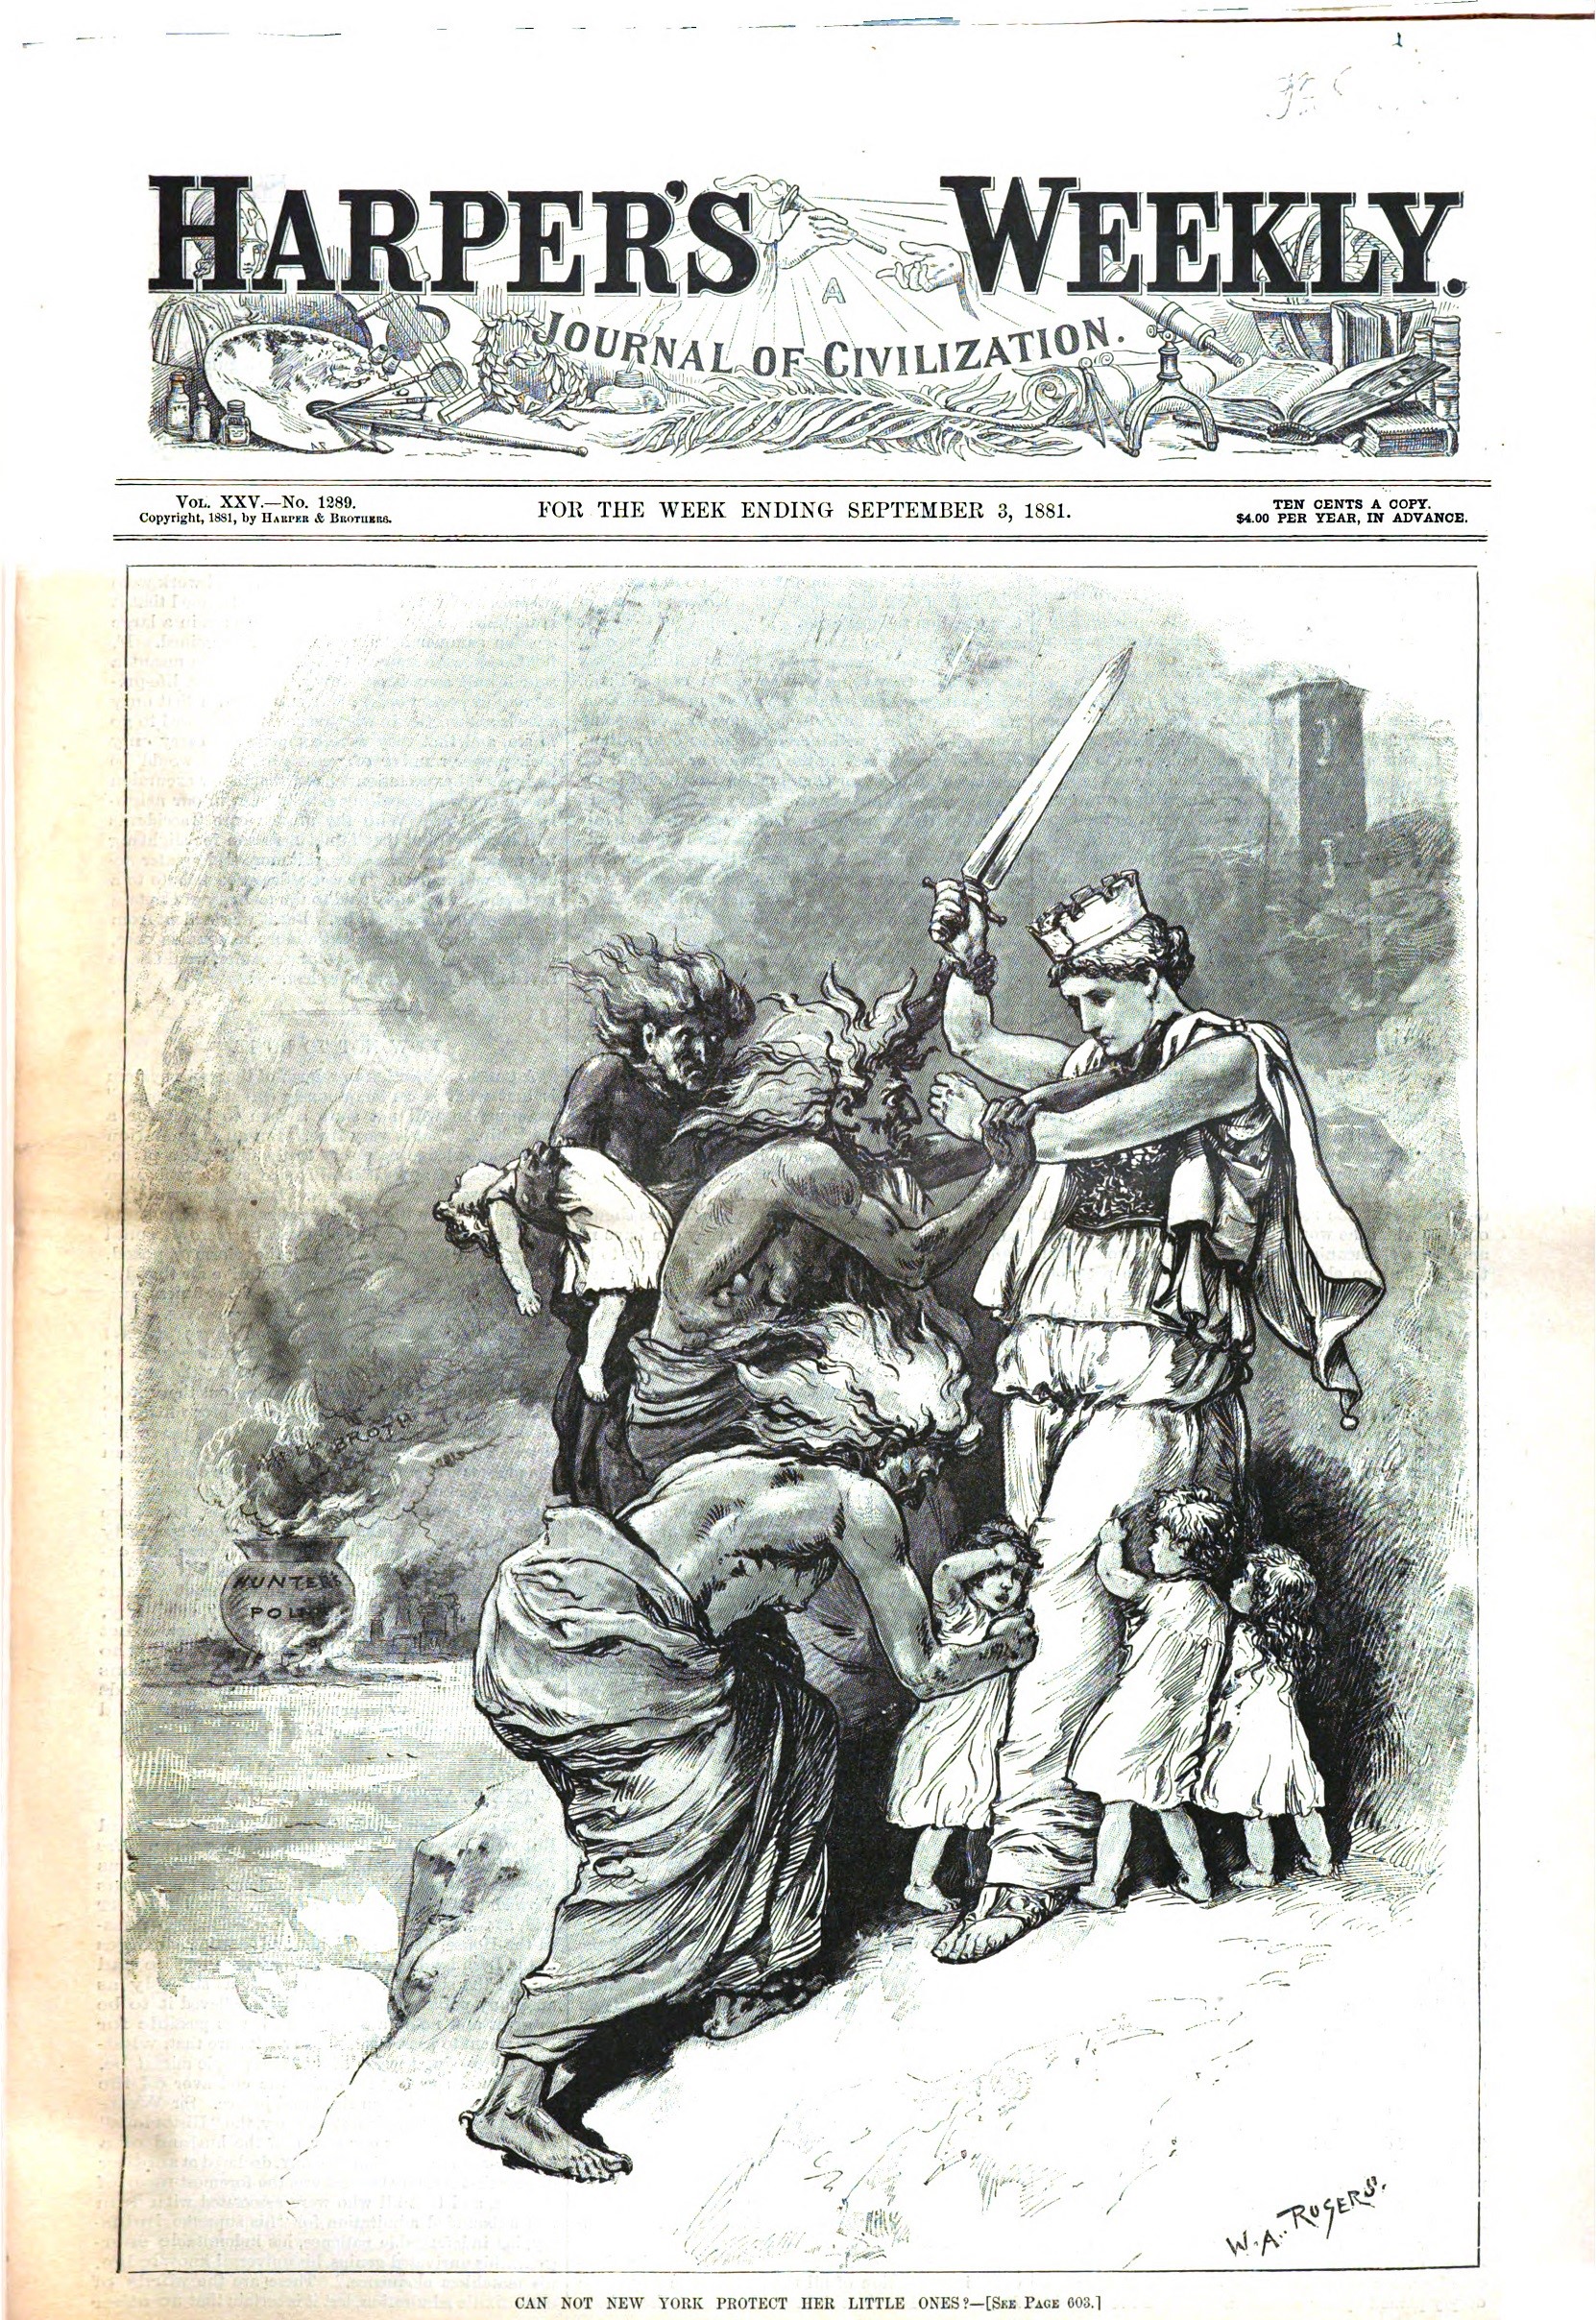 Cover of Harper's Weekly for September 3, 1881, showing the masthead above an illustration with the same characters as fig. 18. Here there is no cauldron, and small children cling to the legs of the woman in white as the witches attack them.